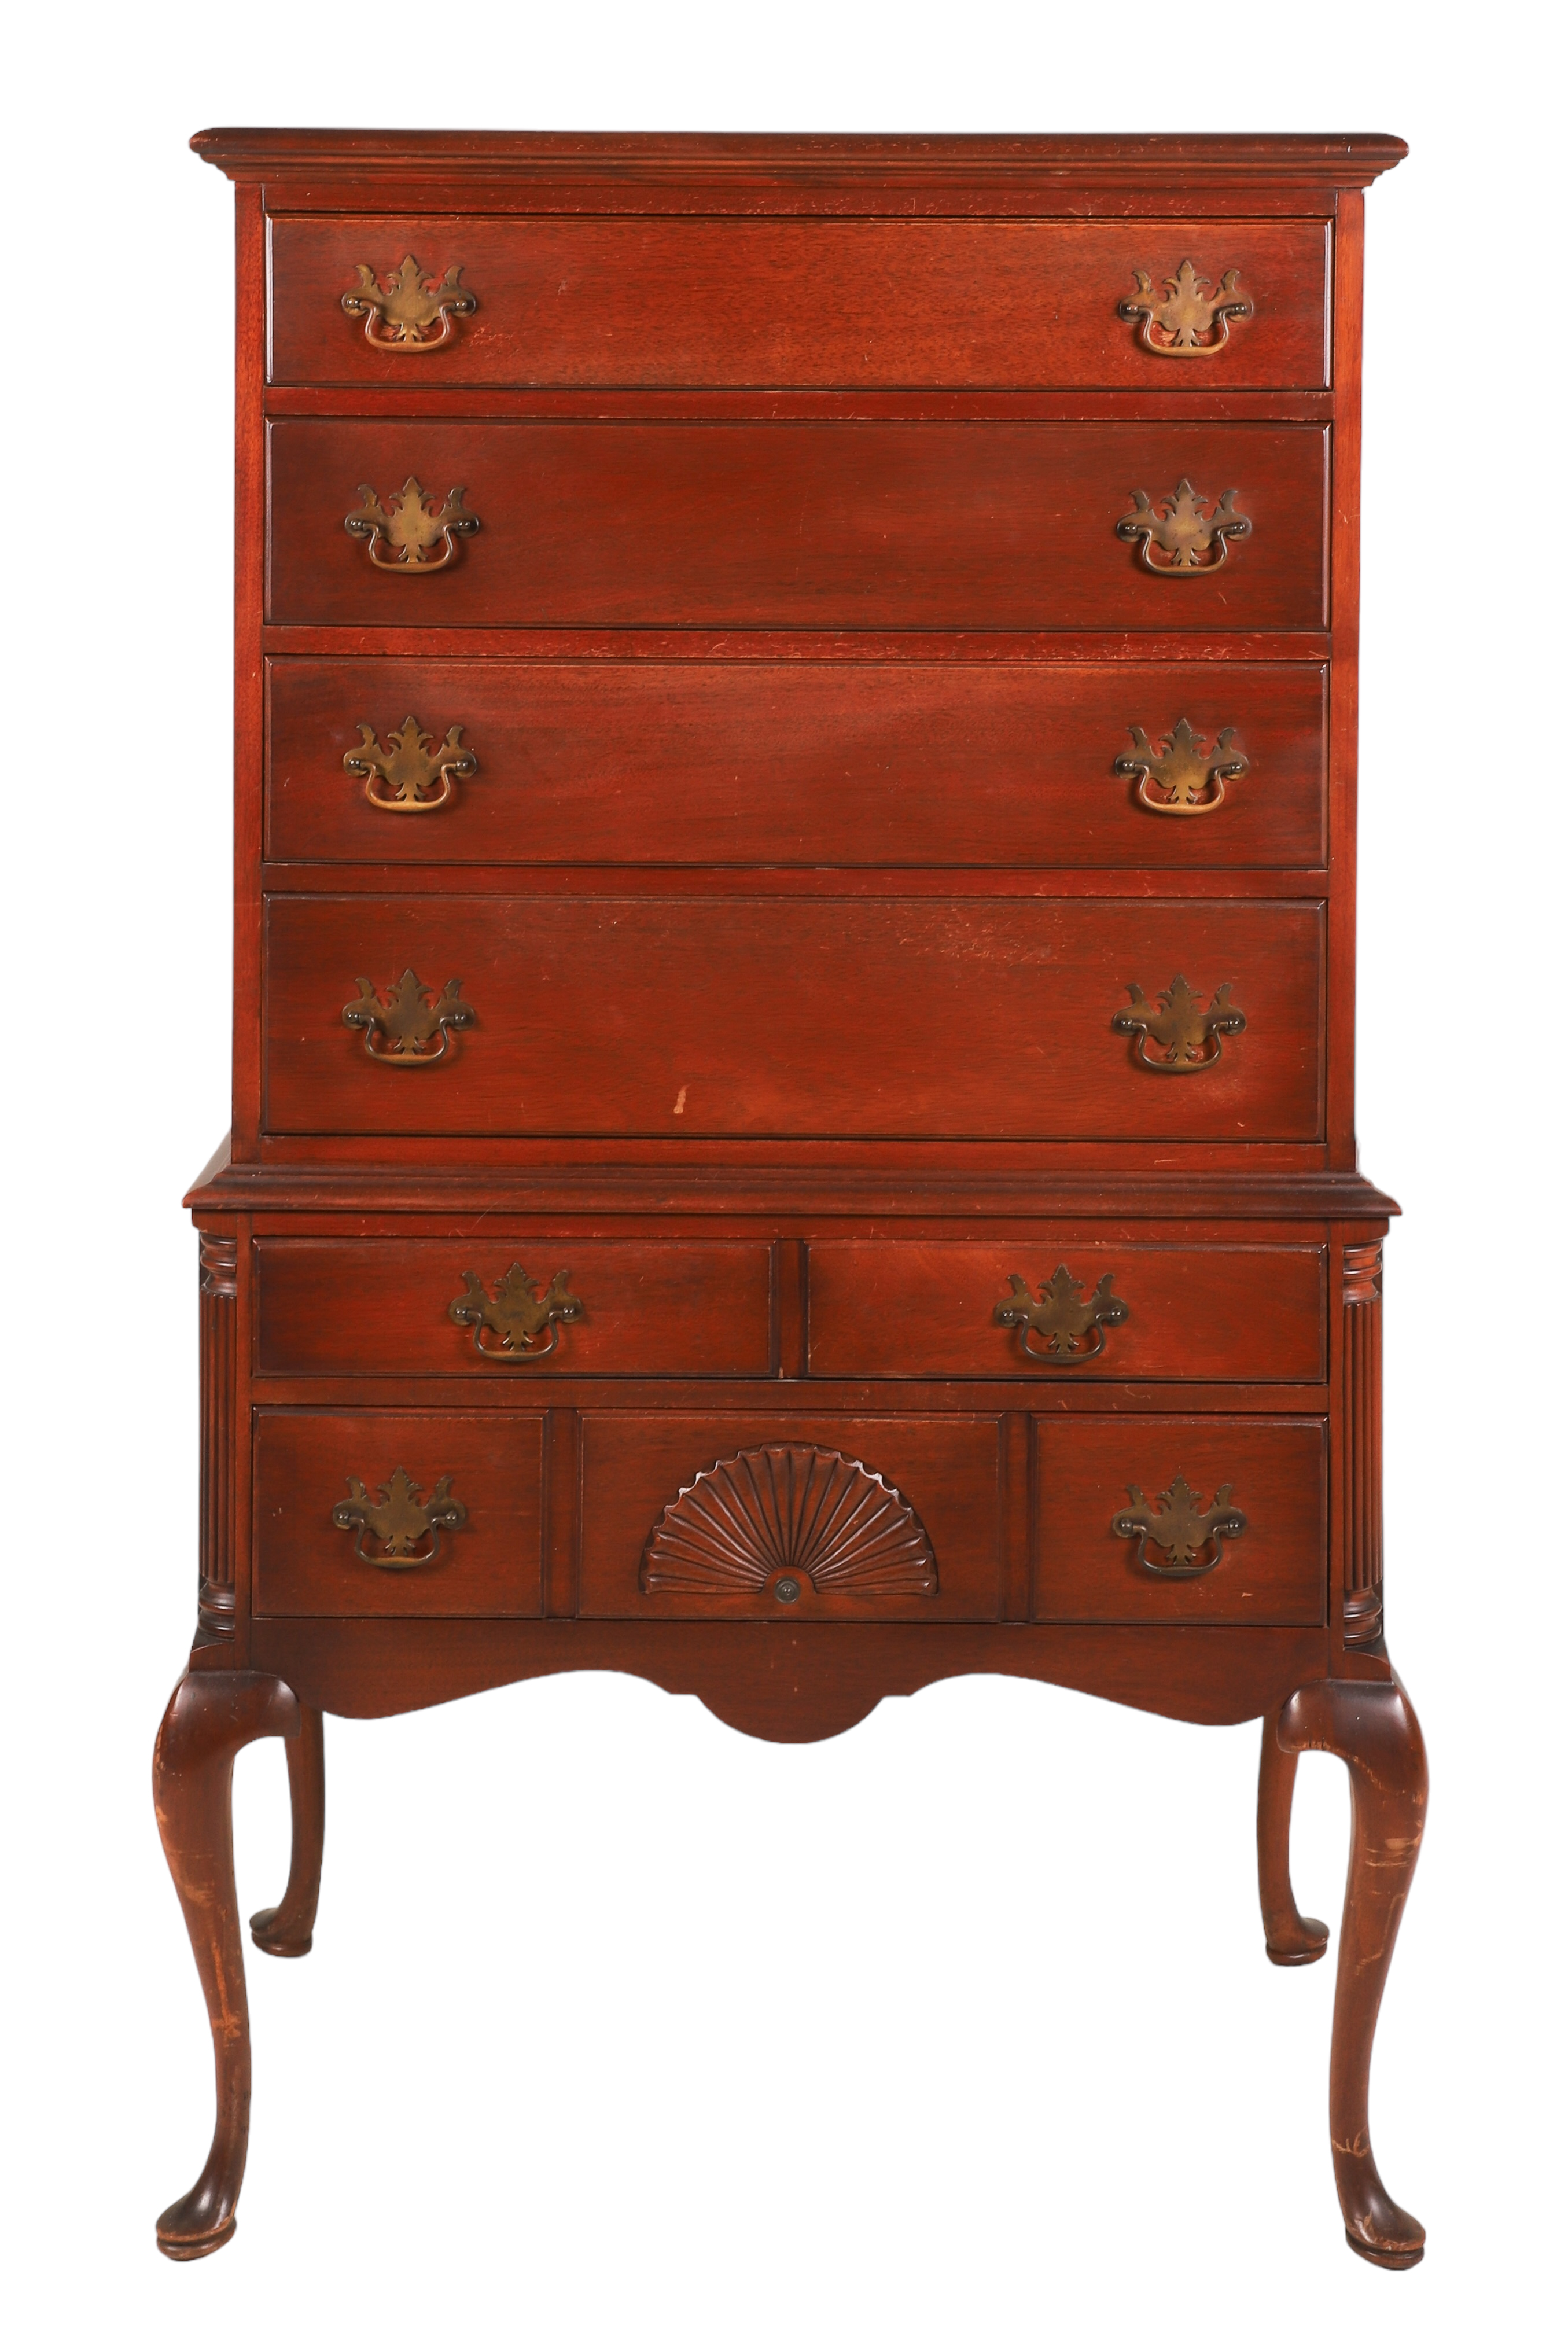 Queen Anne style mahogany high 2e2330